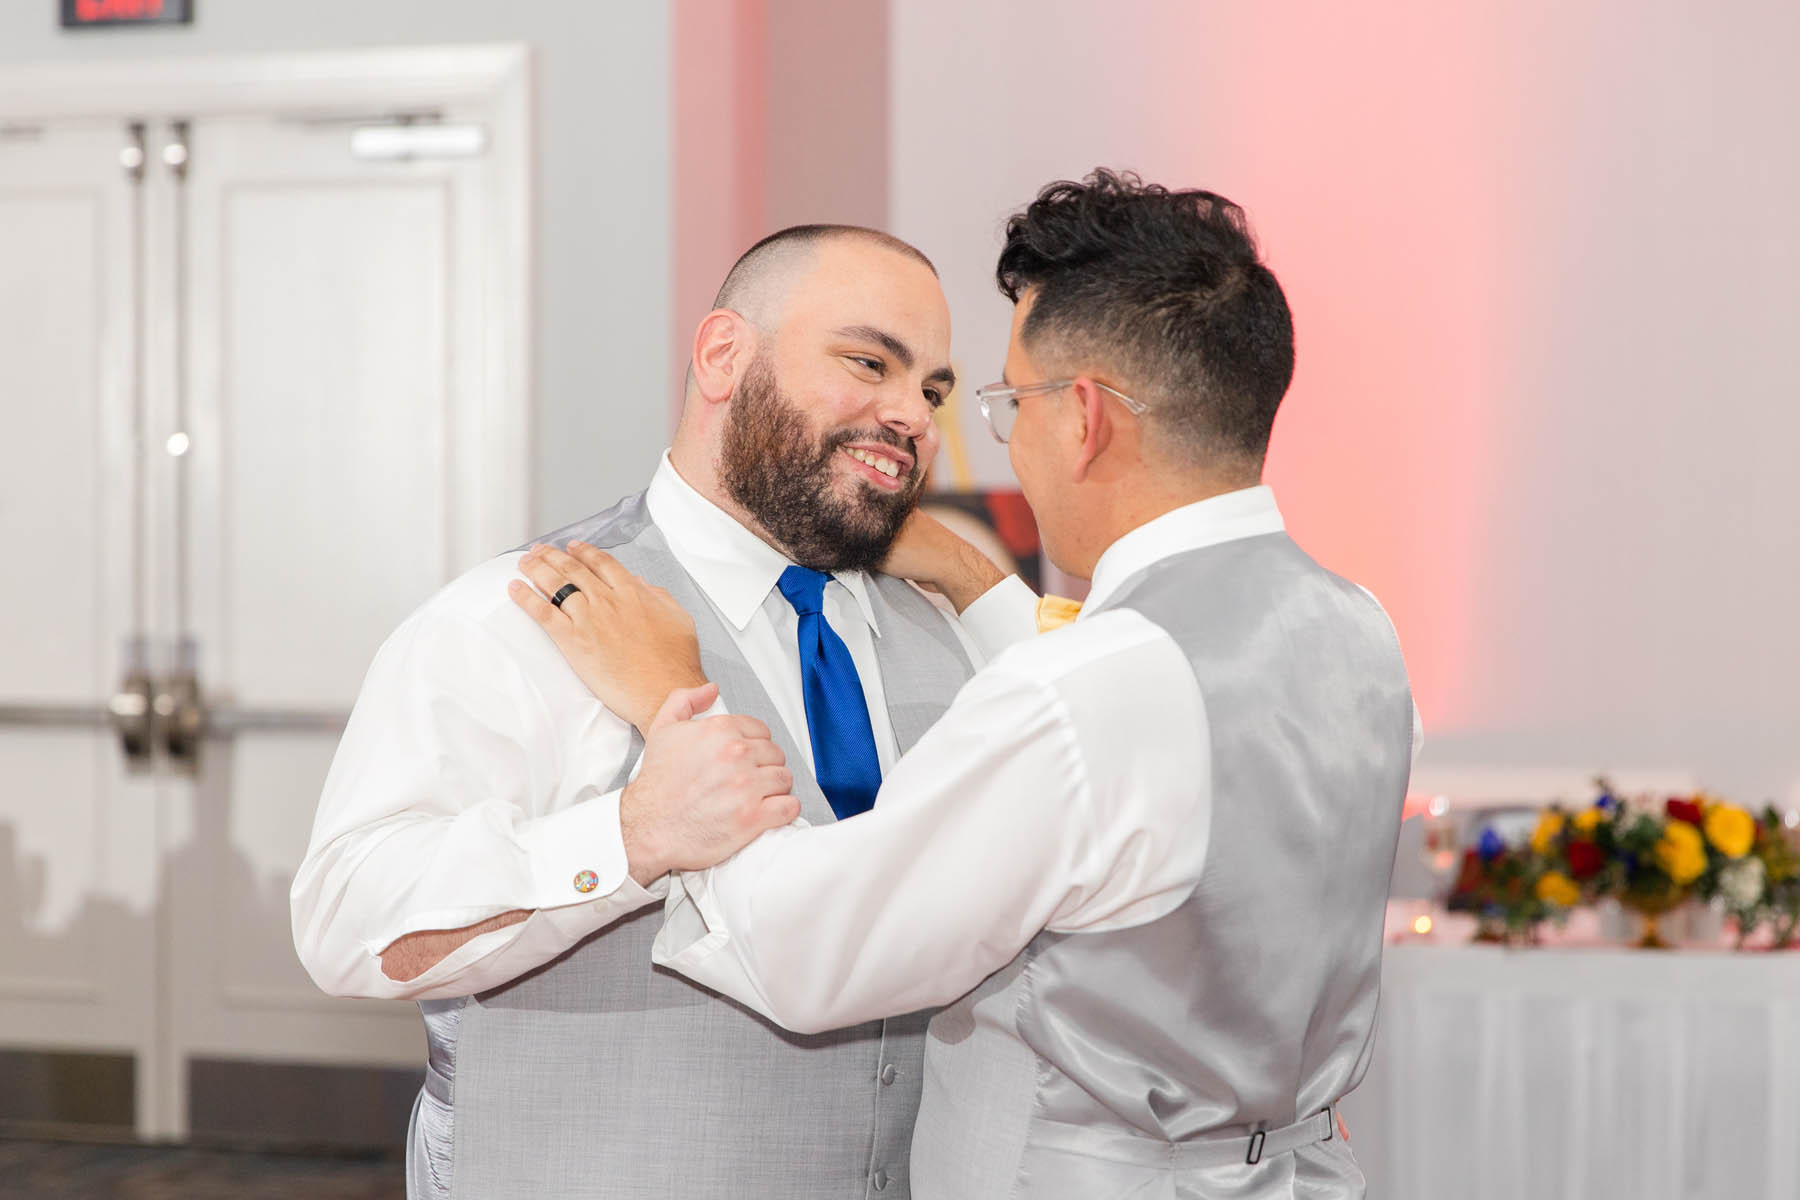 The grooms stand in the middle of the dance floor, gazing lovingly at each other.